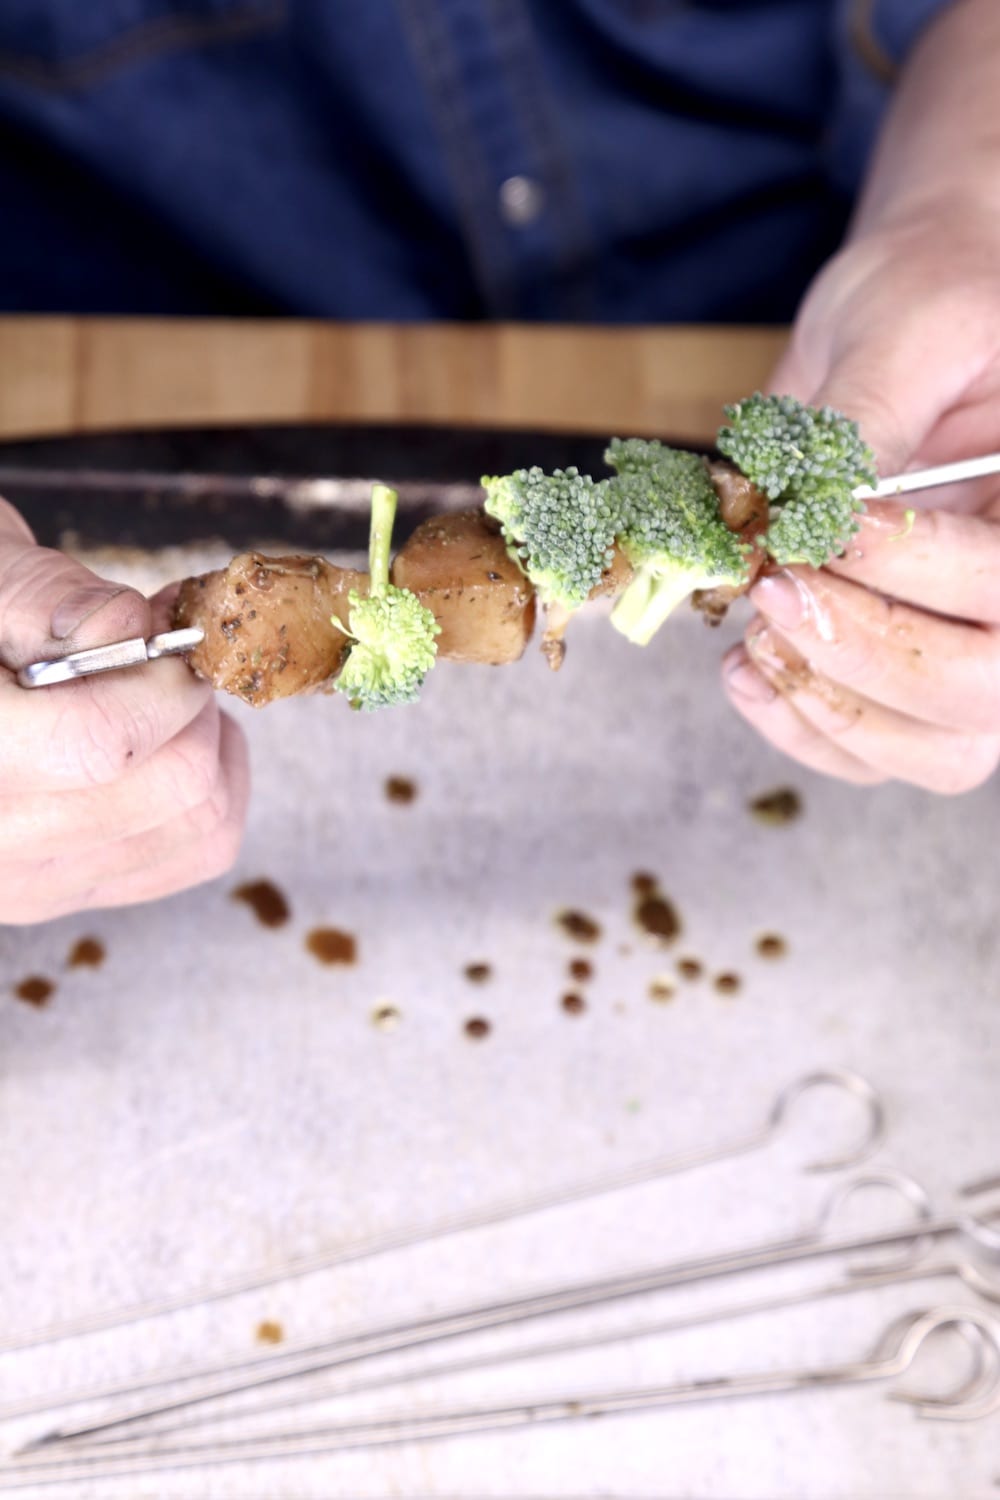 threading broccoli and chicken onto skewers